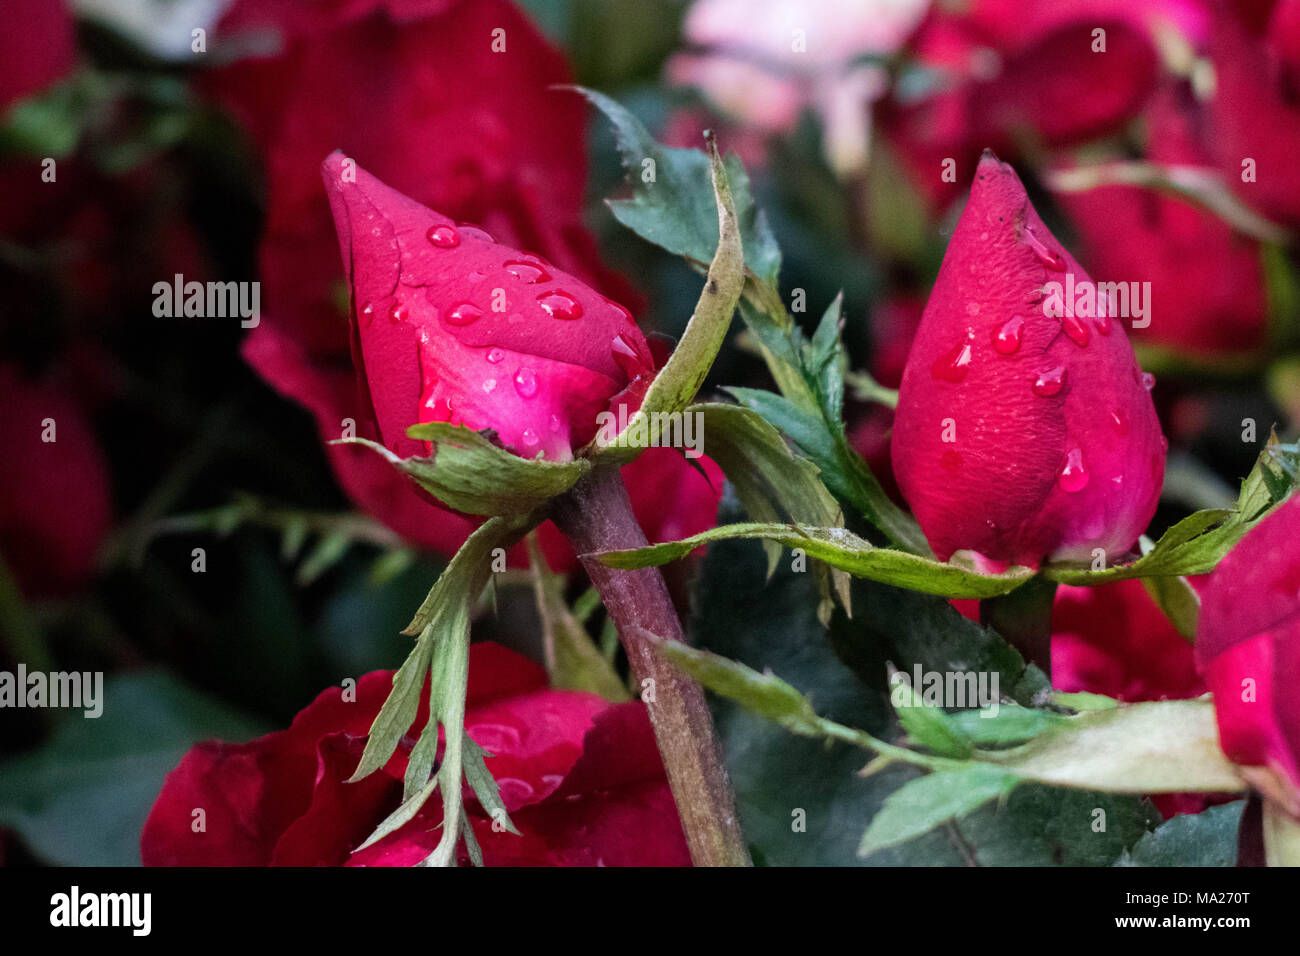 Closed Red Roses with droplets Stock Photo - Alamy